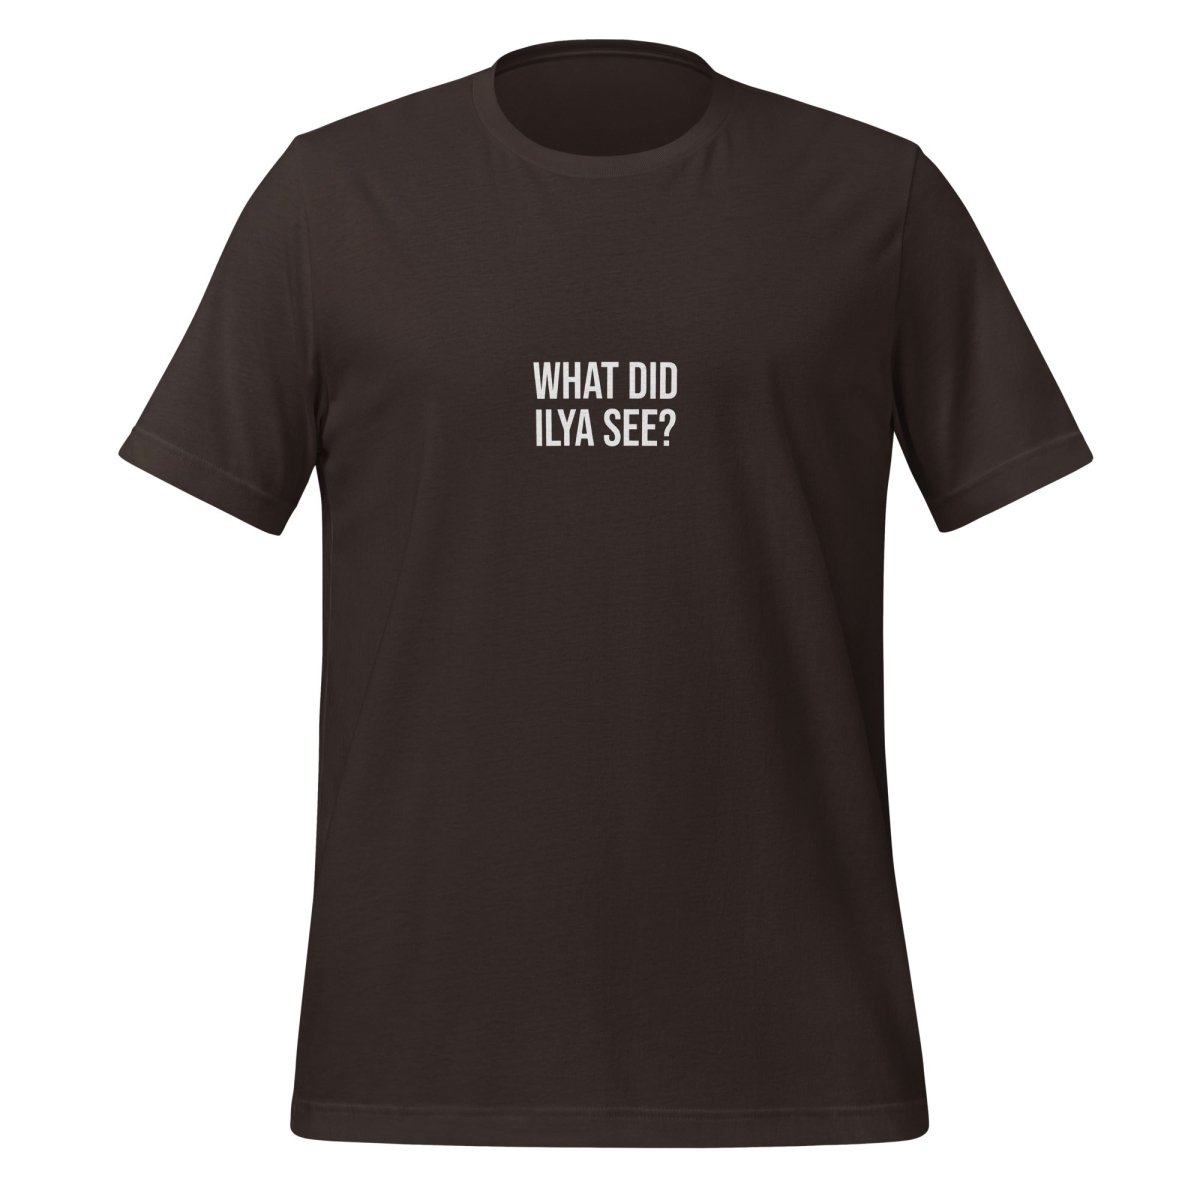 WHAT DID ILYA SEE? T - Shirt 4 (unisex) - Brown - AI Store